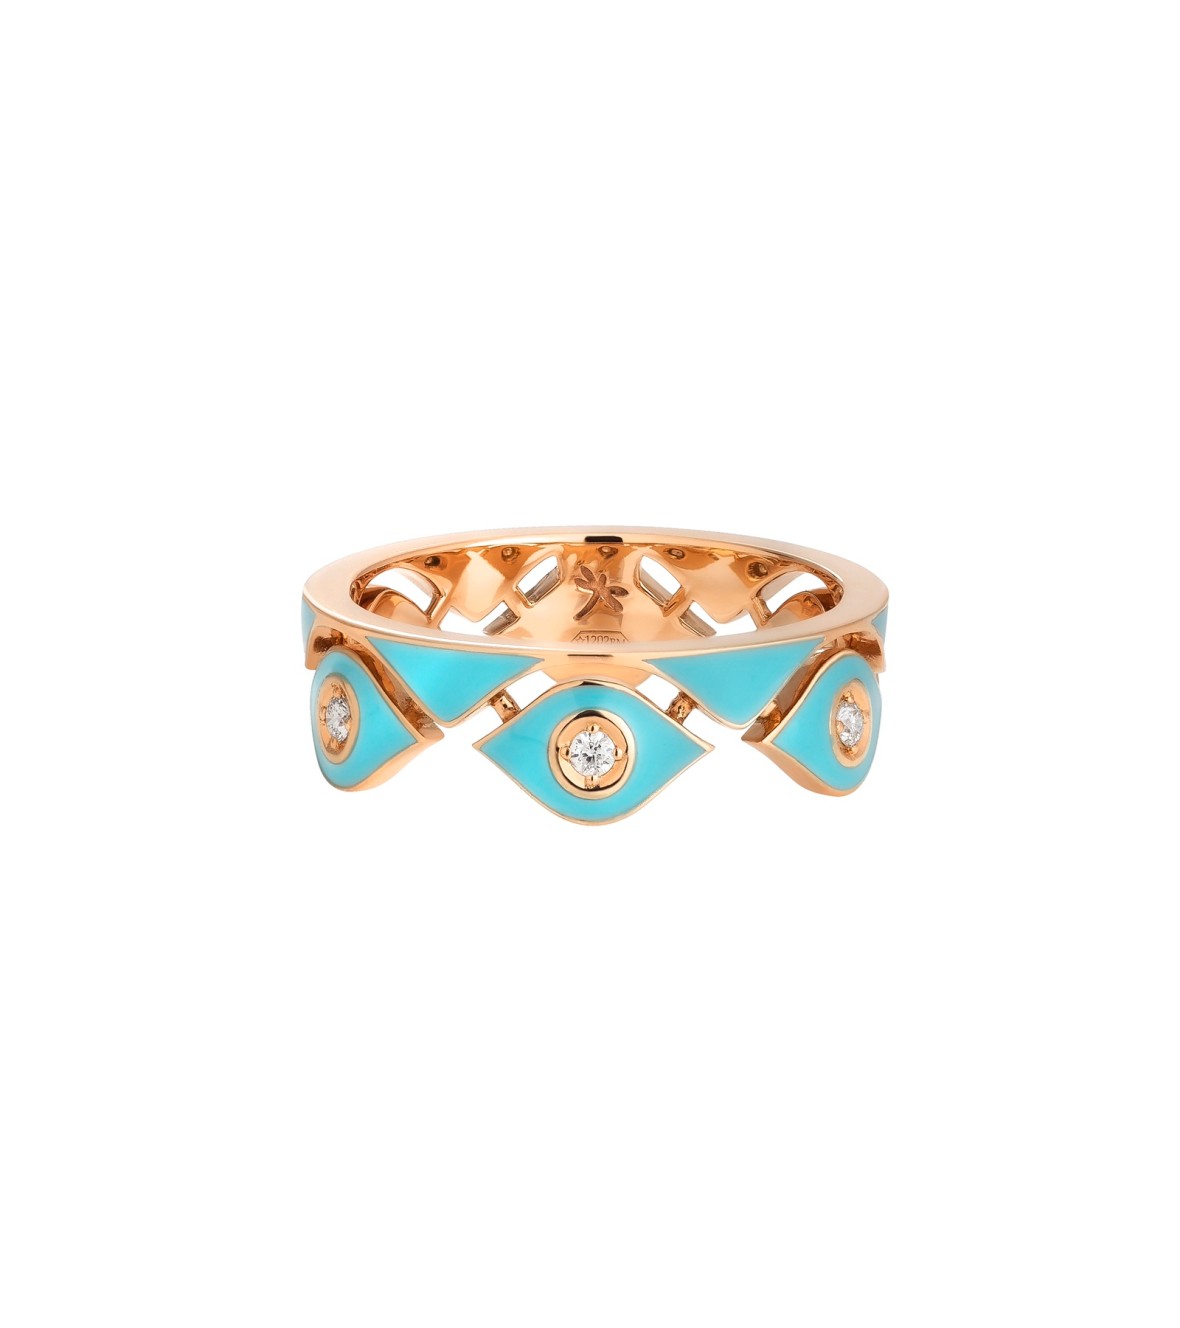 Yellow Gold Ring with Diamonds and Turquoise Enamel Casato